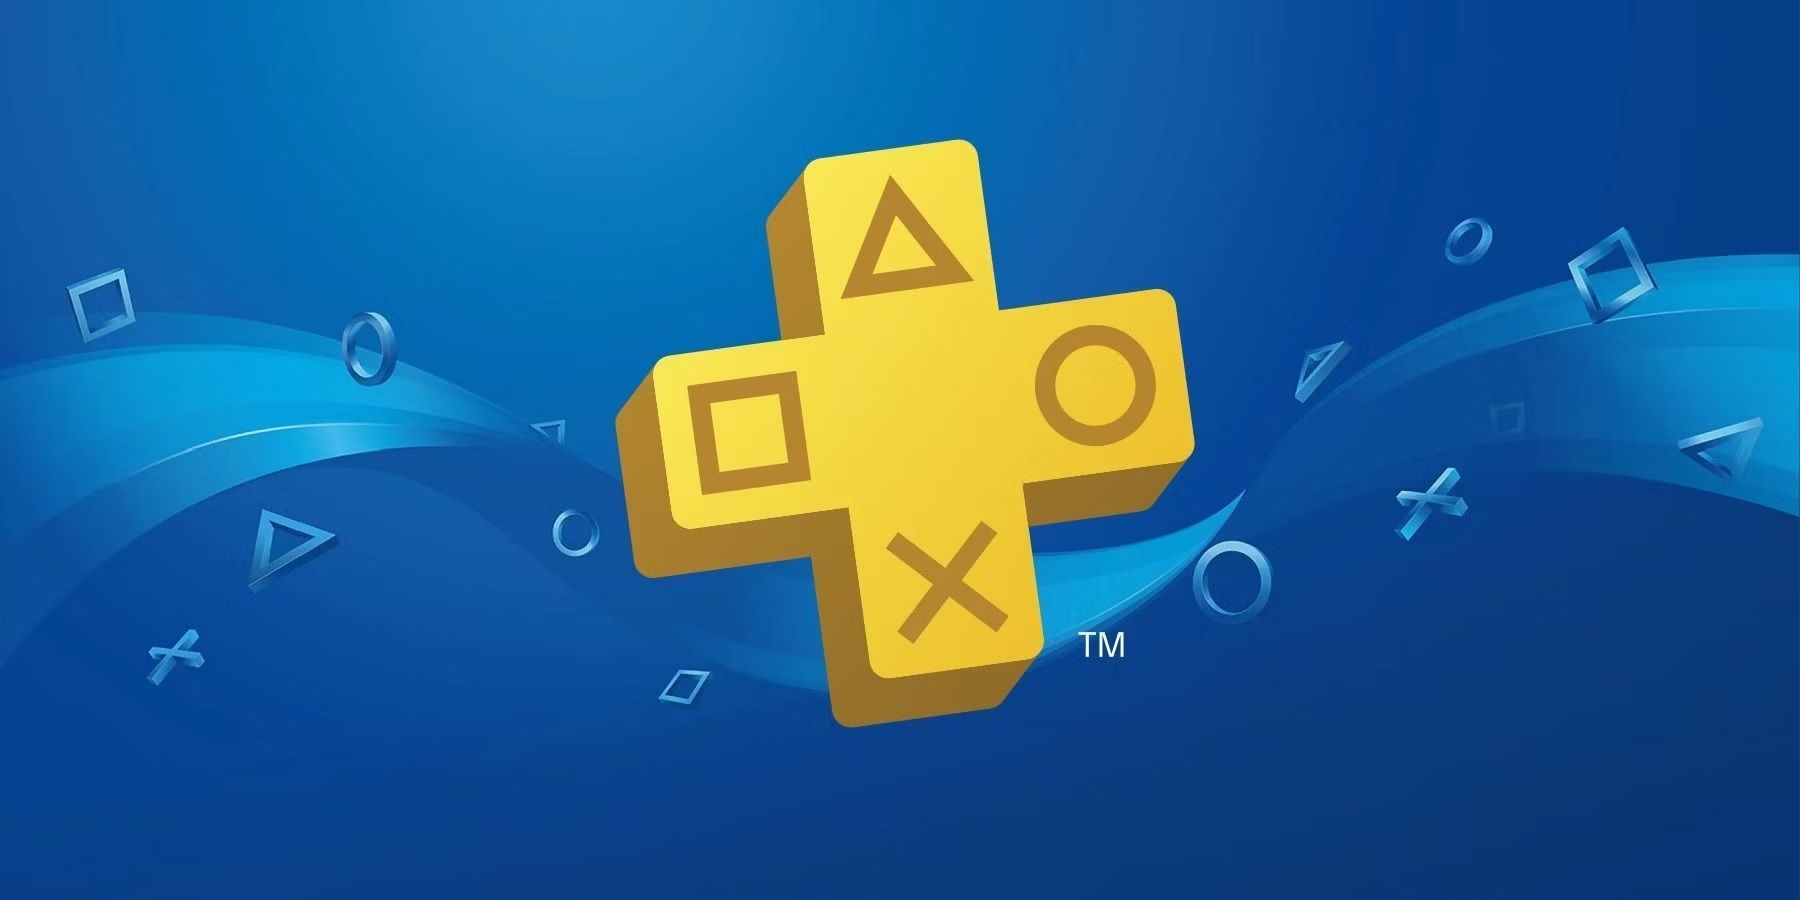 Black Friday PlayStation Plus deals go live today